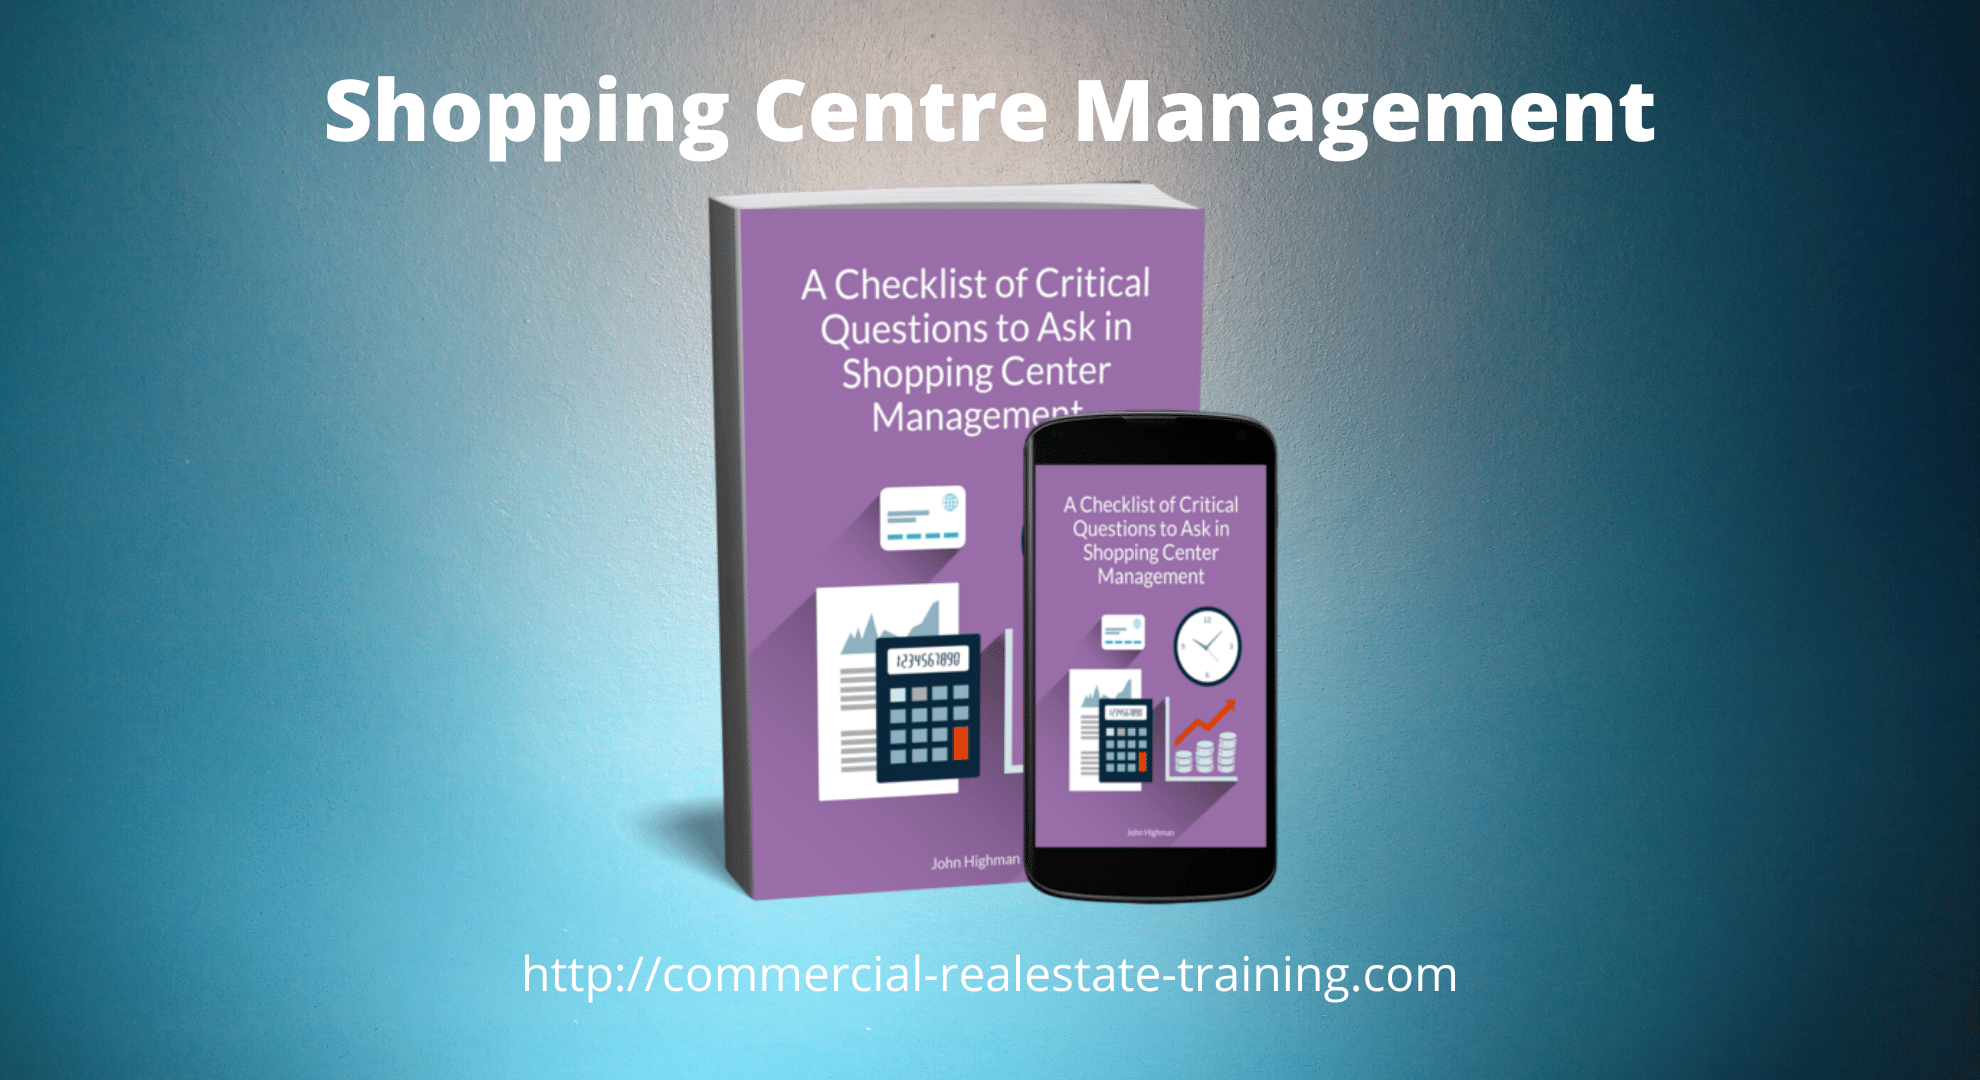 ebook for shopping centre management